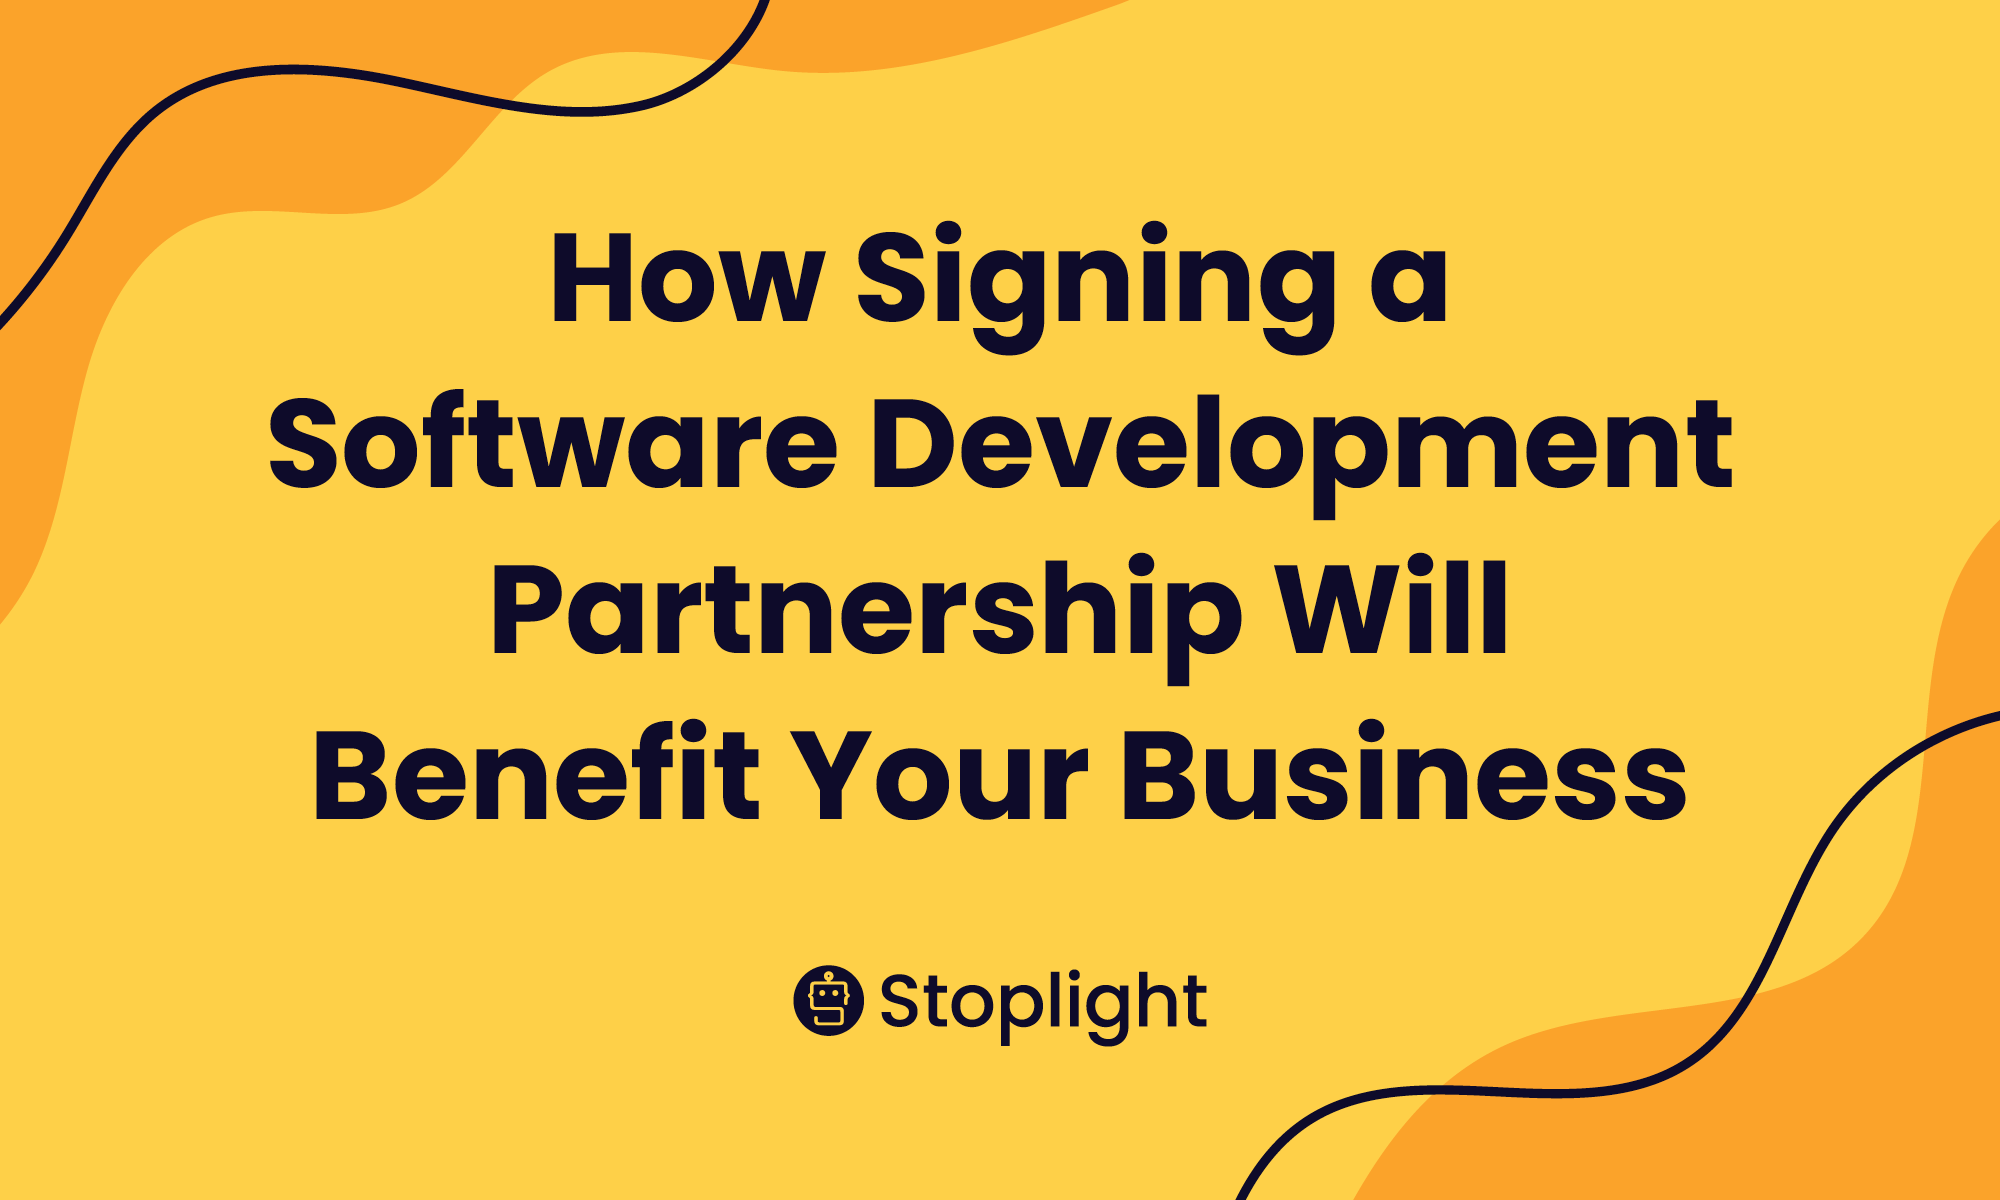 How Signing a Software Development Partnership Will Benefit Your Business